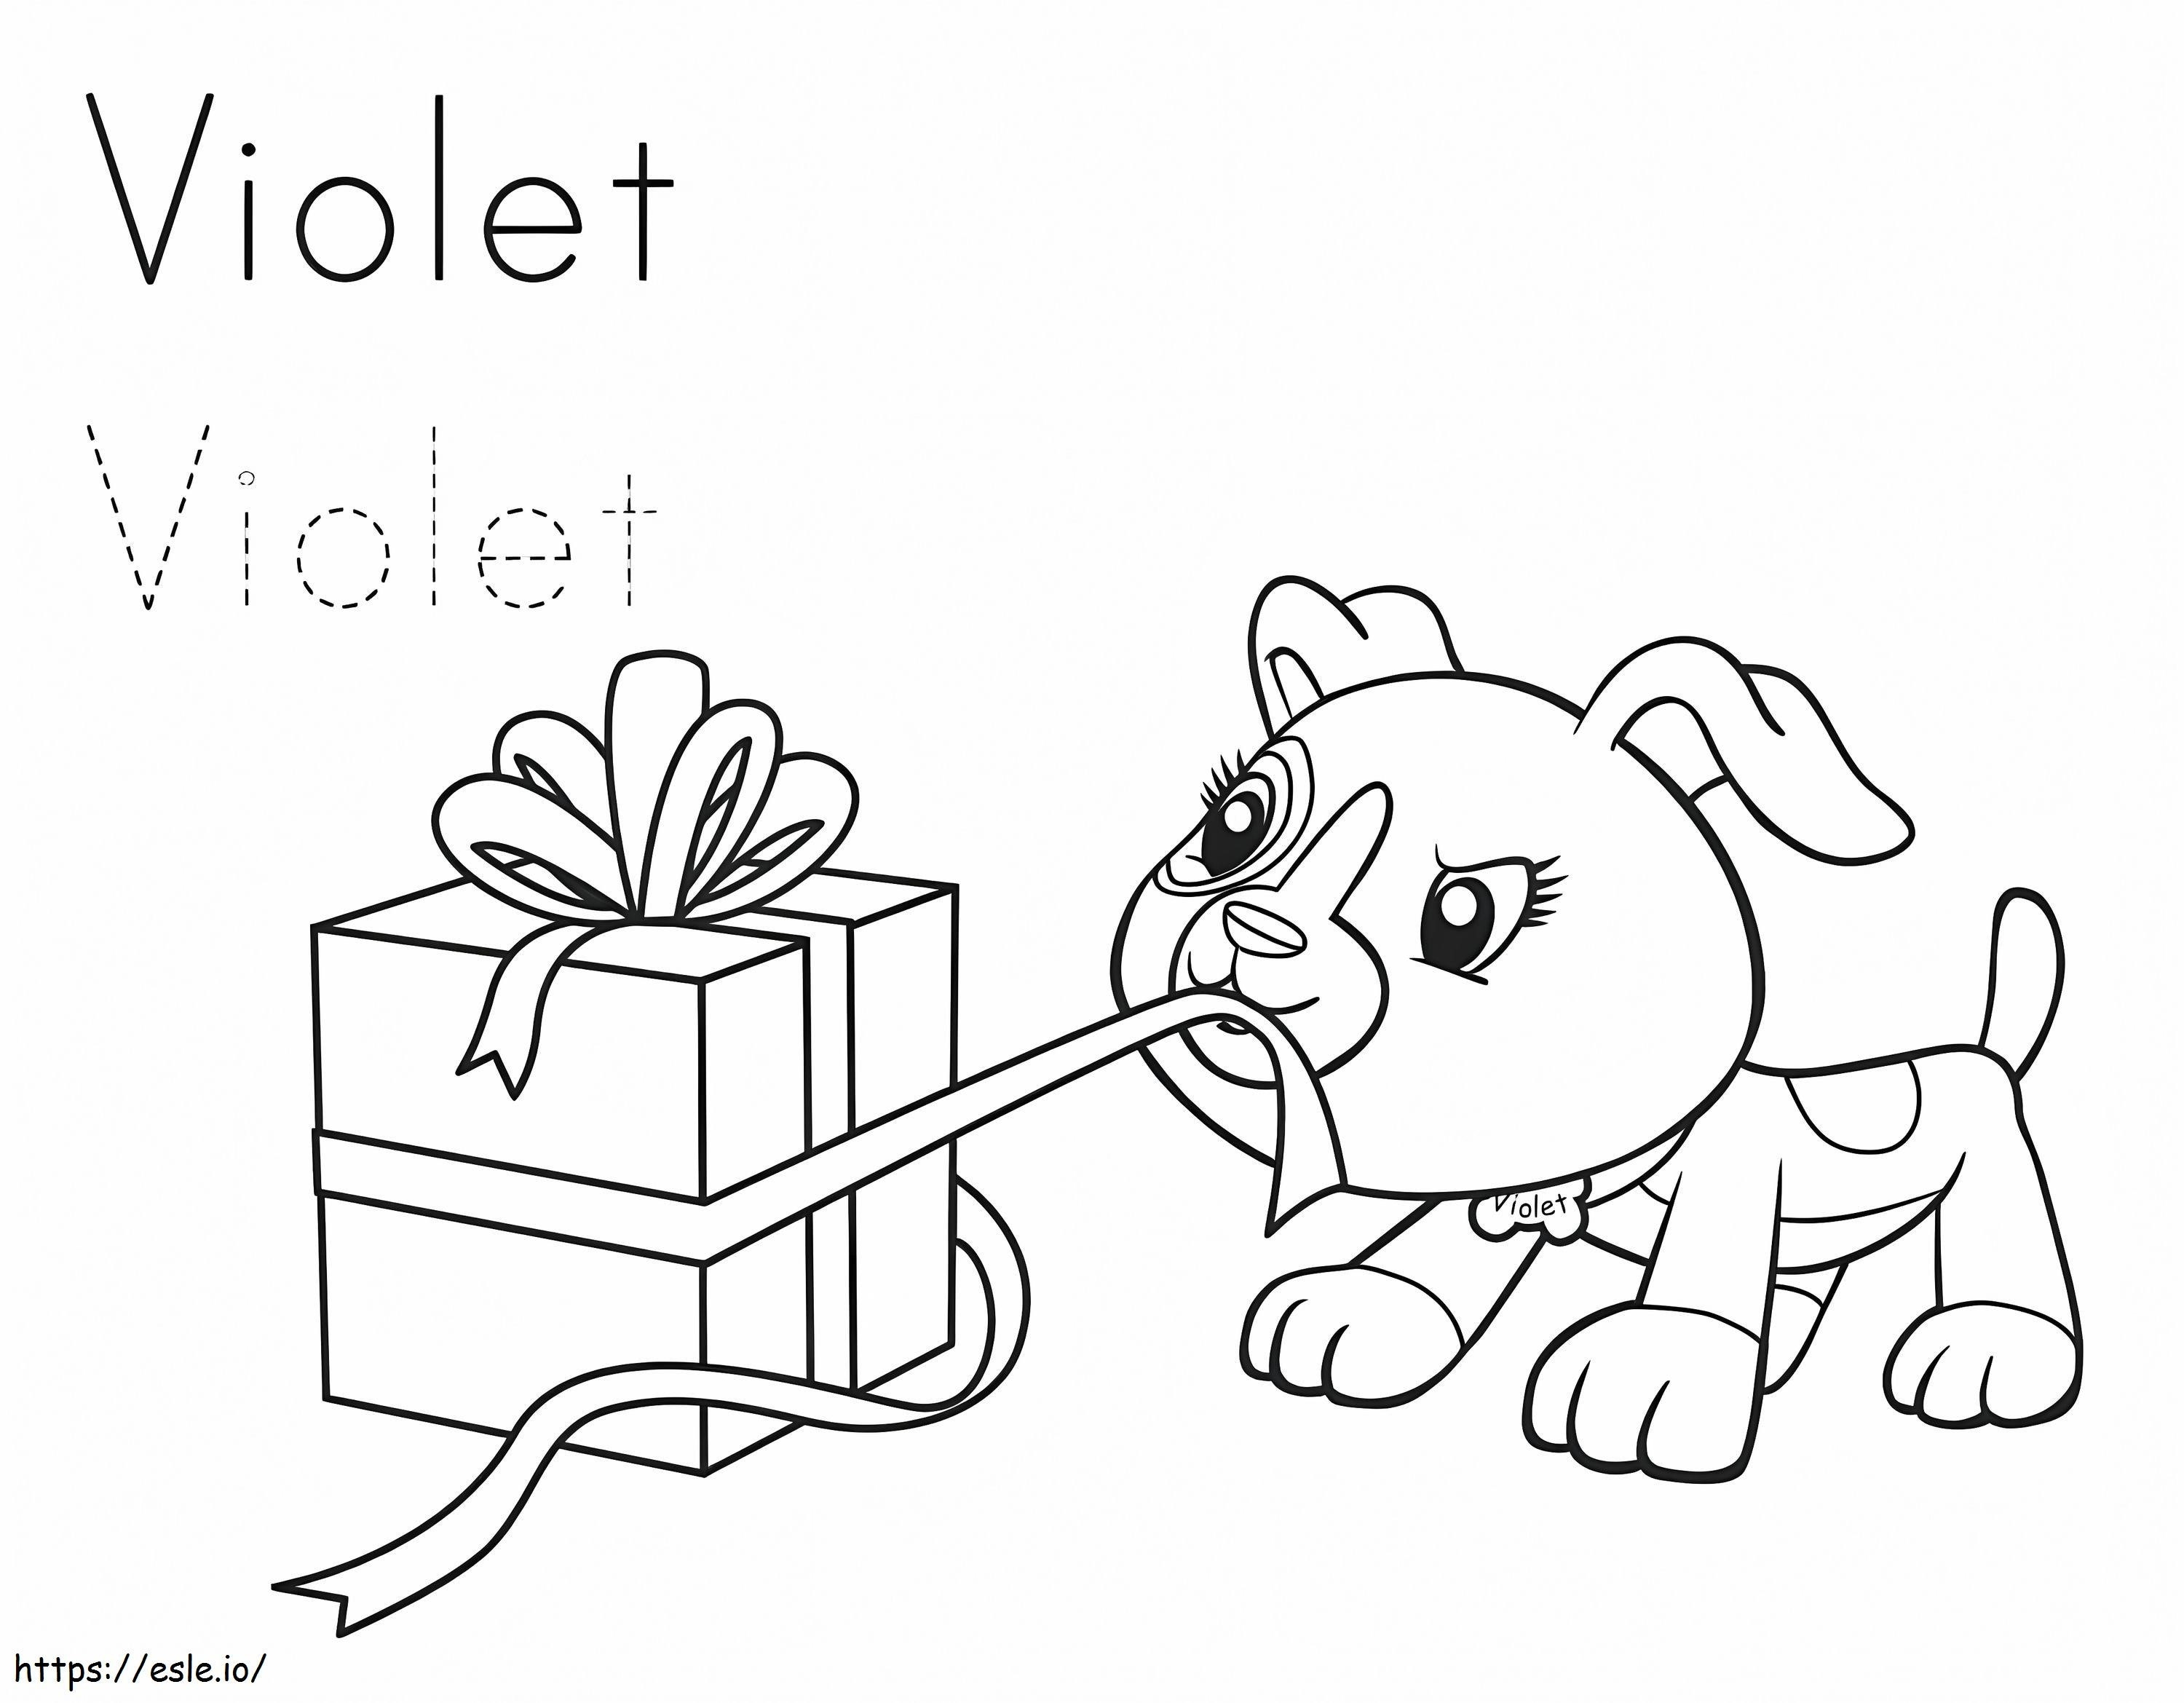 Violet From Leapfrog coloring page